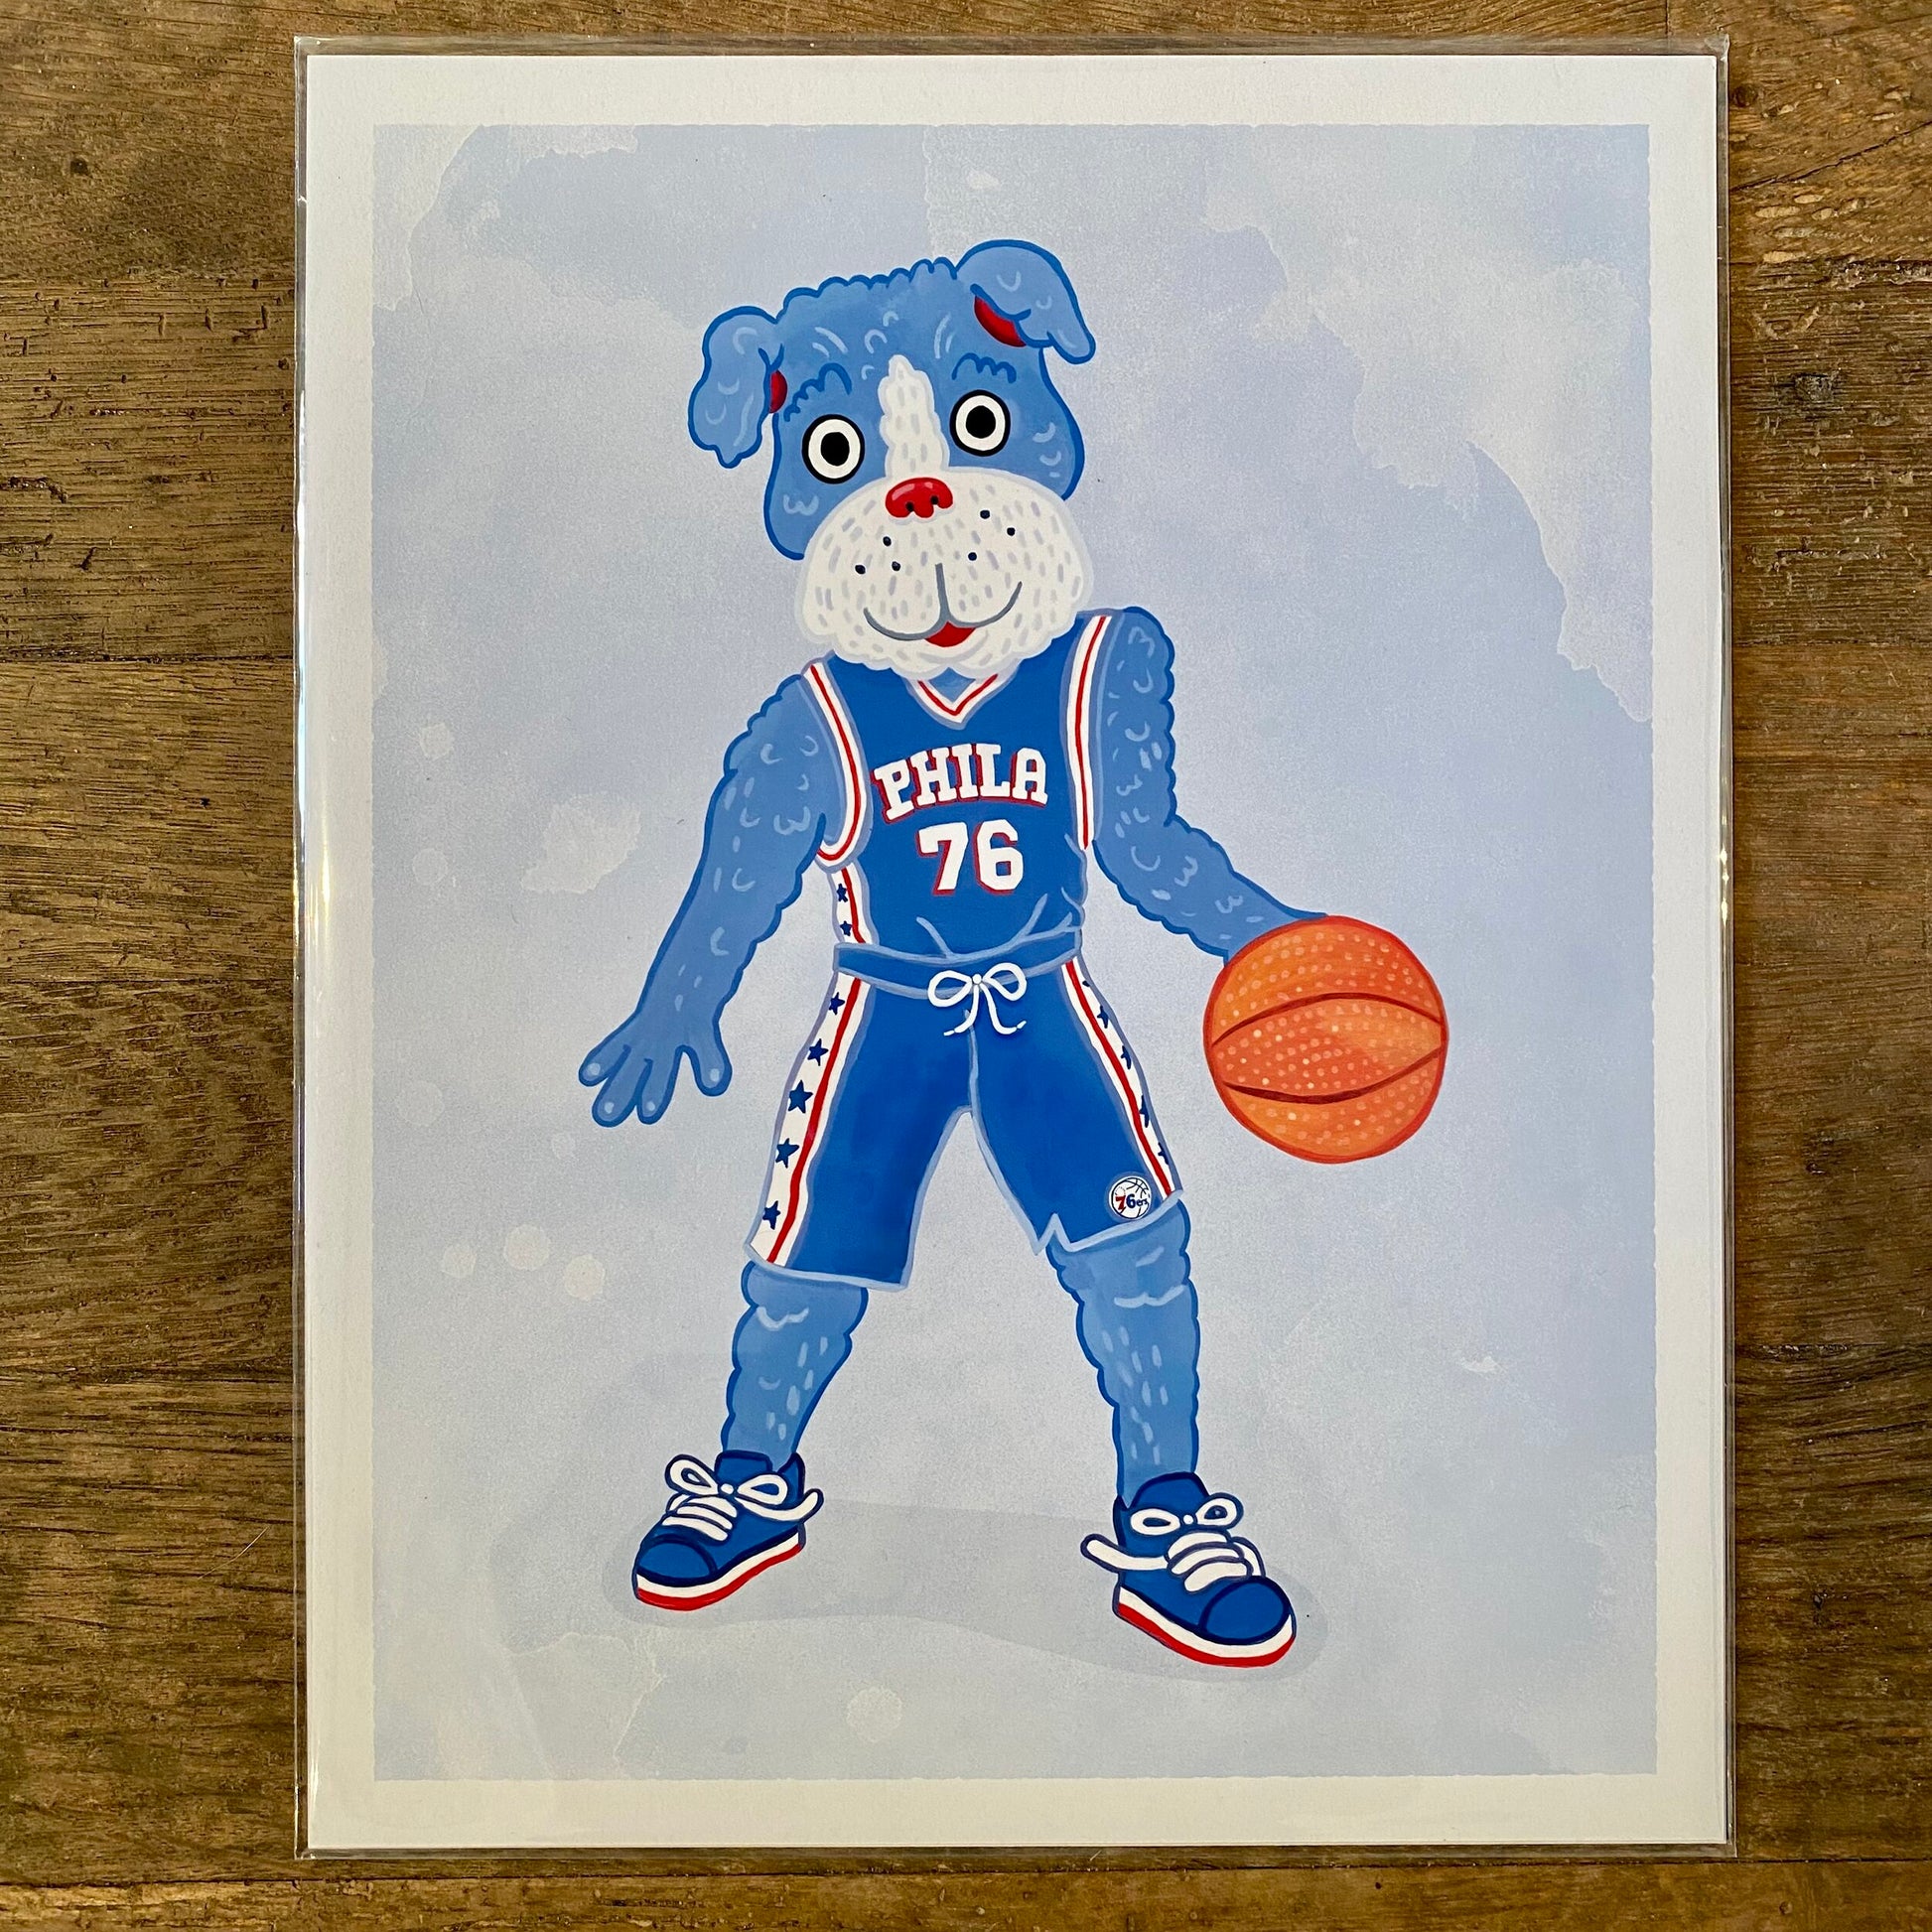 Illustration of a gritty cartoon dog character wearing a Philly Mascot Prints basketball jersey and dribbling a basketball by Jamie Bendas.